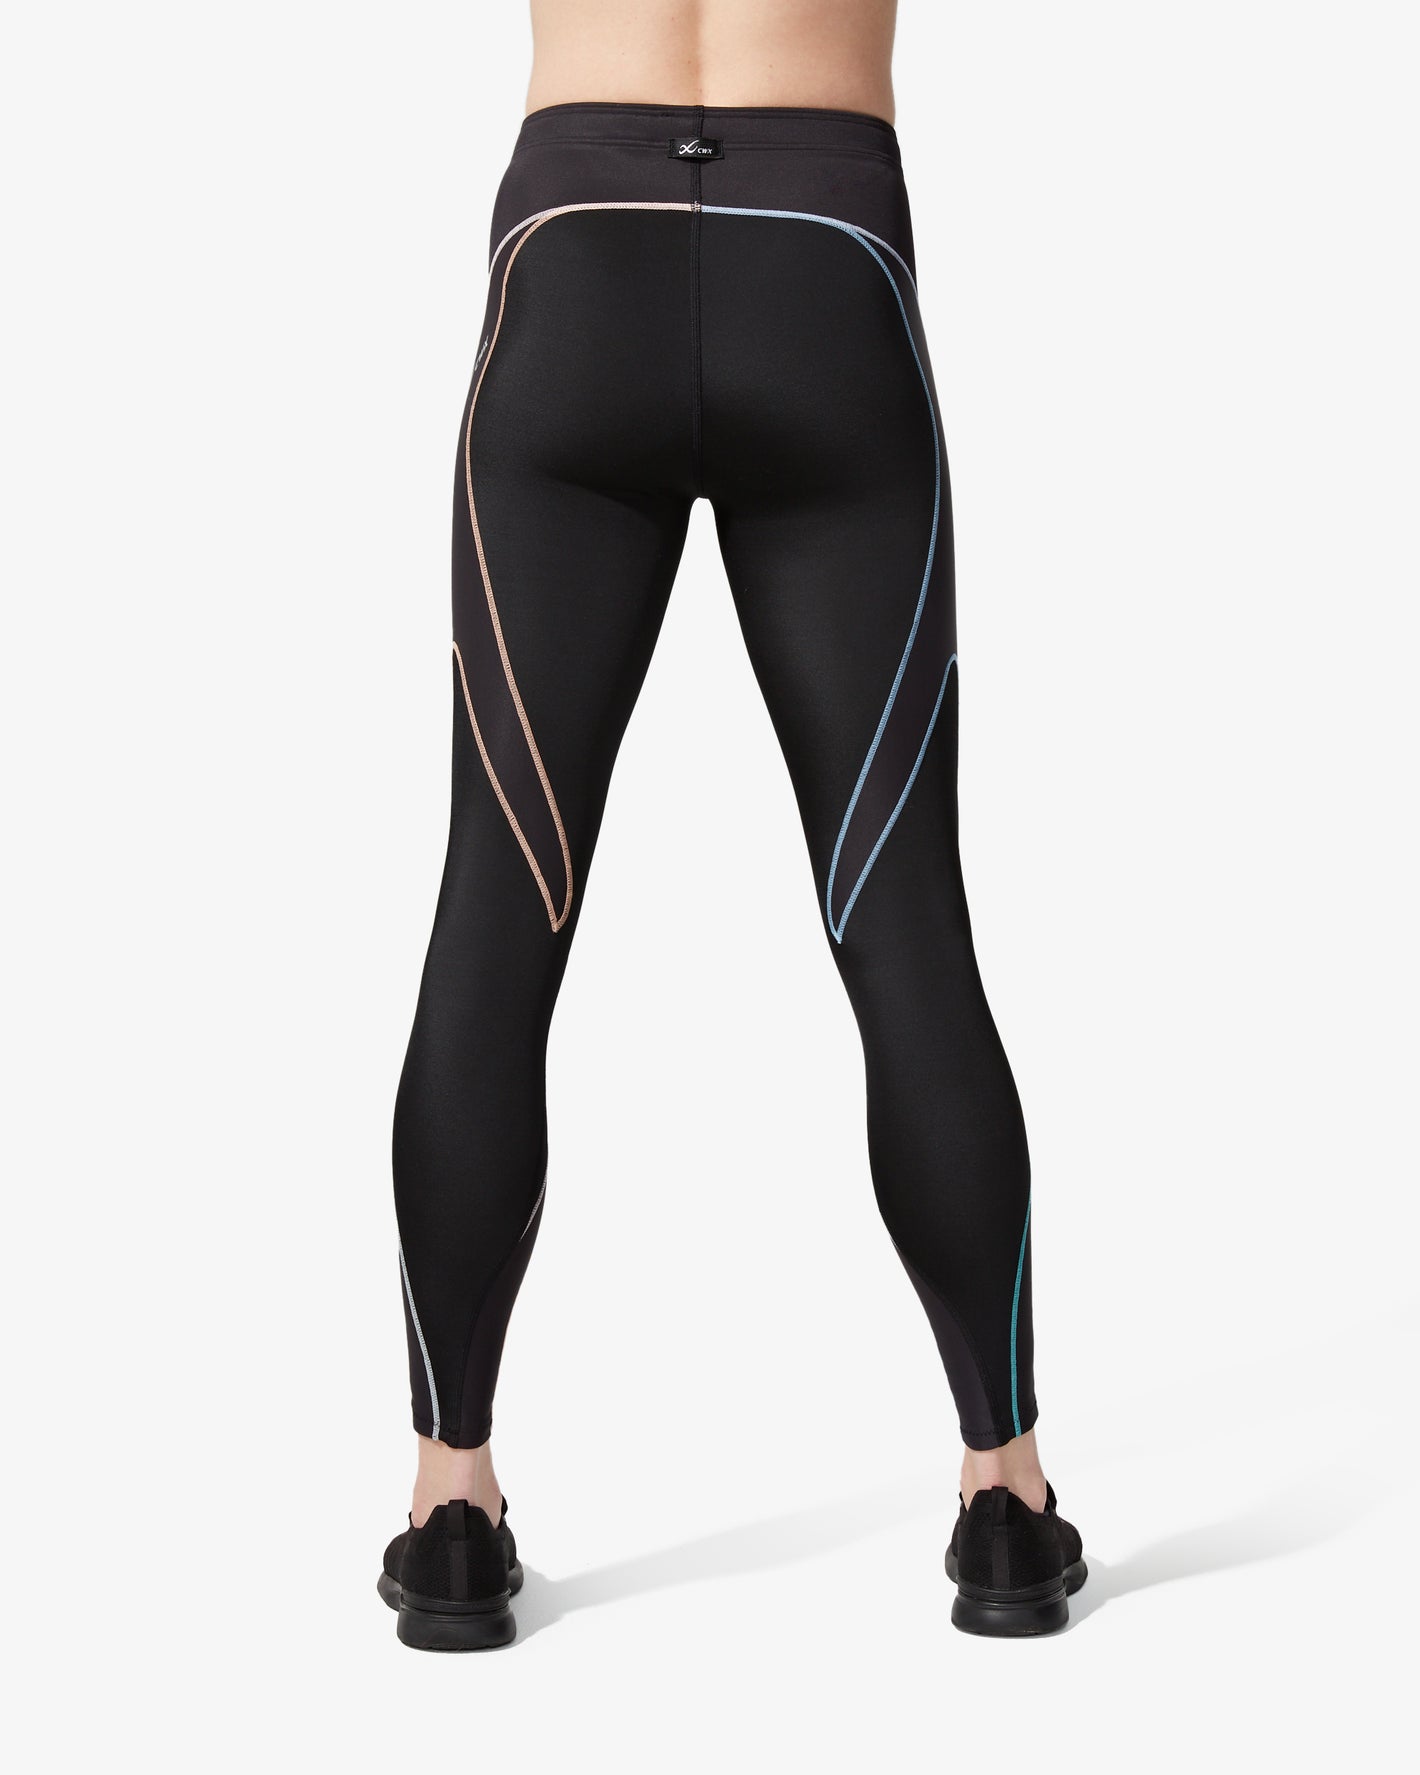 Stabilyx Joint Support Compression Tight - Women's Black/Gradient